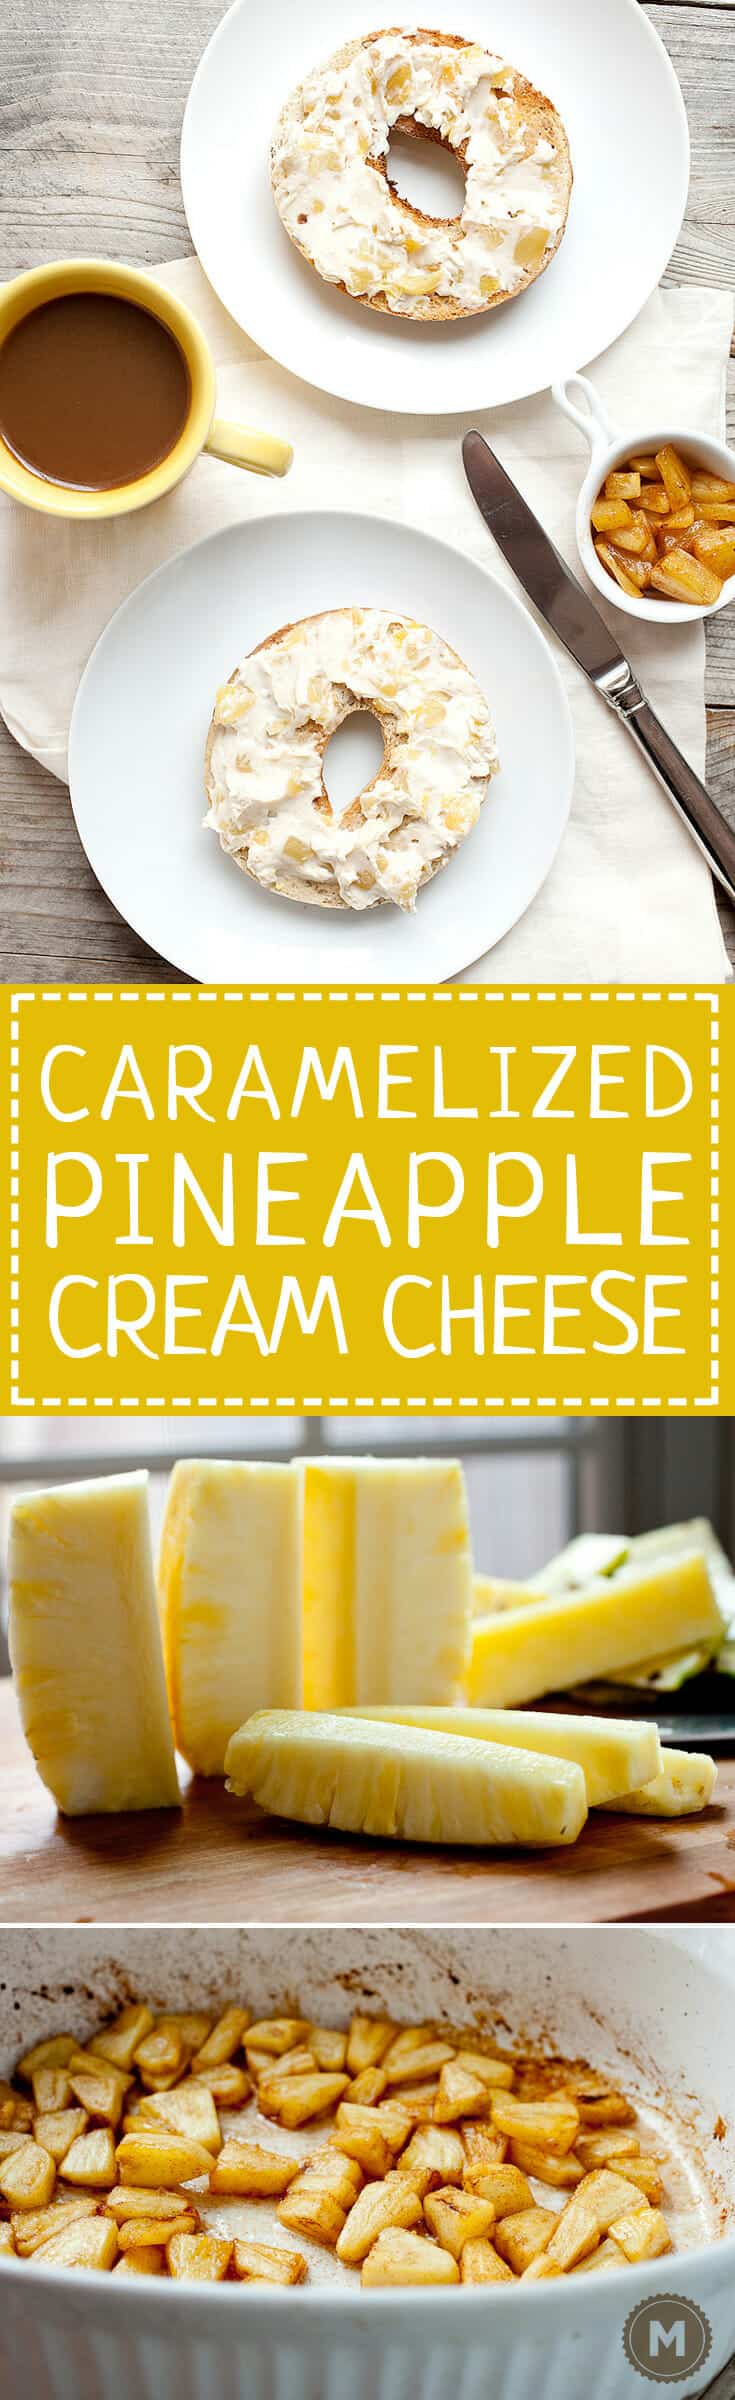 Caramelized Pineapple Cream Cheese: If I'm going to spend the time to make my own bagel spread, it needs to be original (can't find it in the stores) and very delicious (worth the work). This sweet and citrusy spread checks both of those boxes for sure! | macheesmo.com